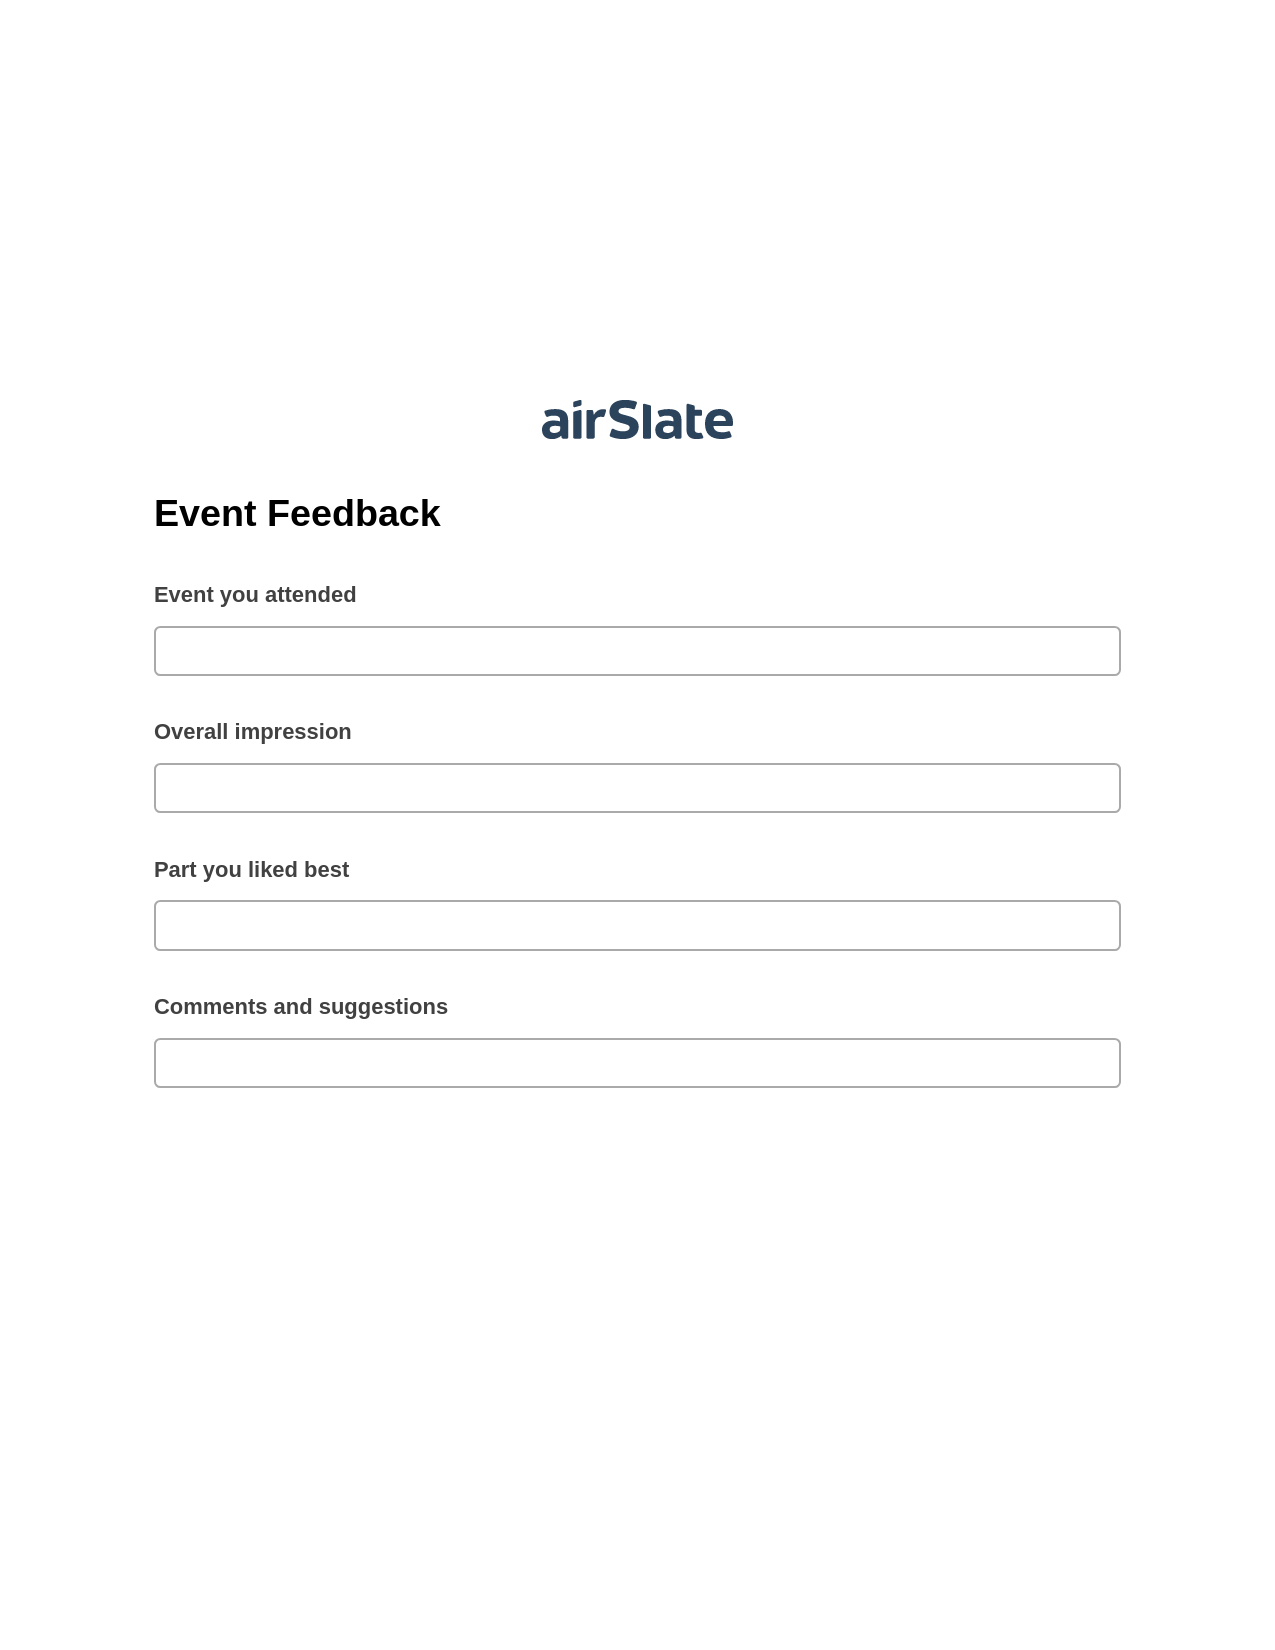 Event Feedback Pre-fill from NetSuite Records Bot, Unassign Role Bot, Dropbox Bot